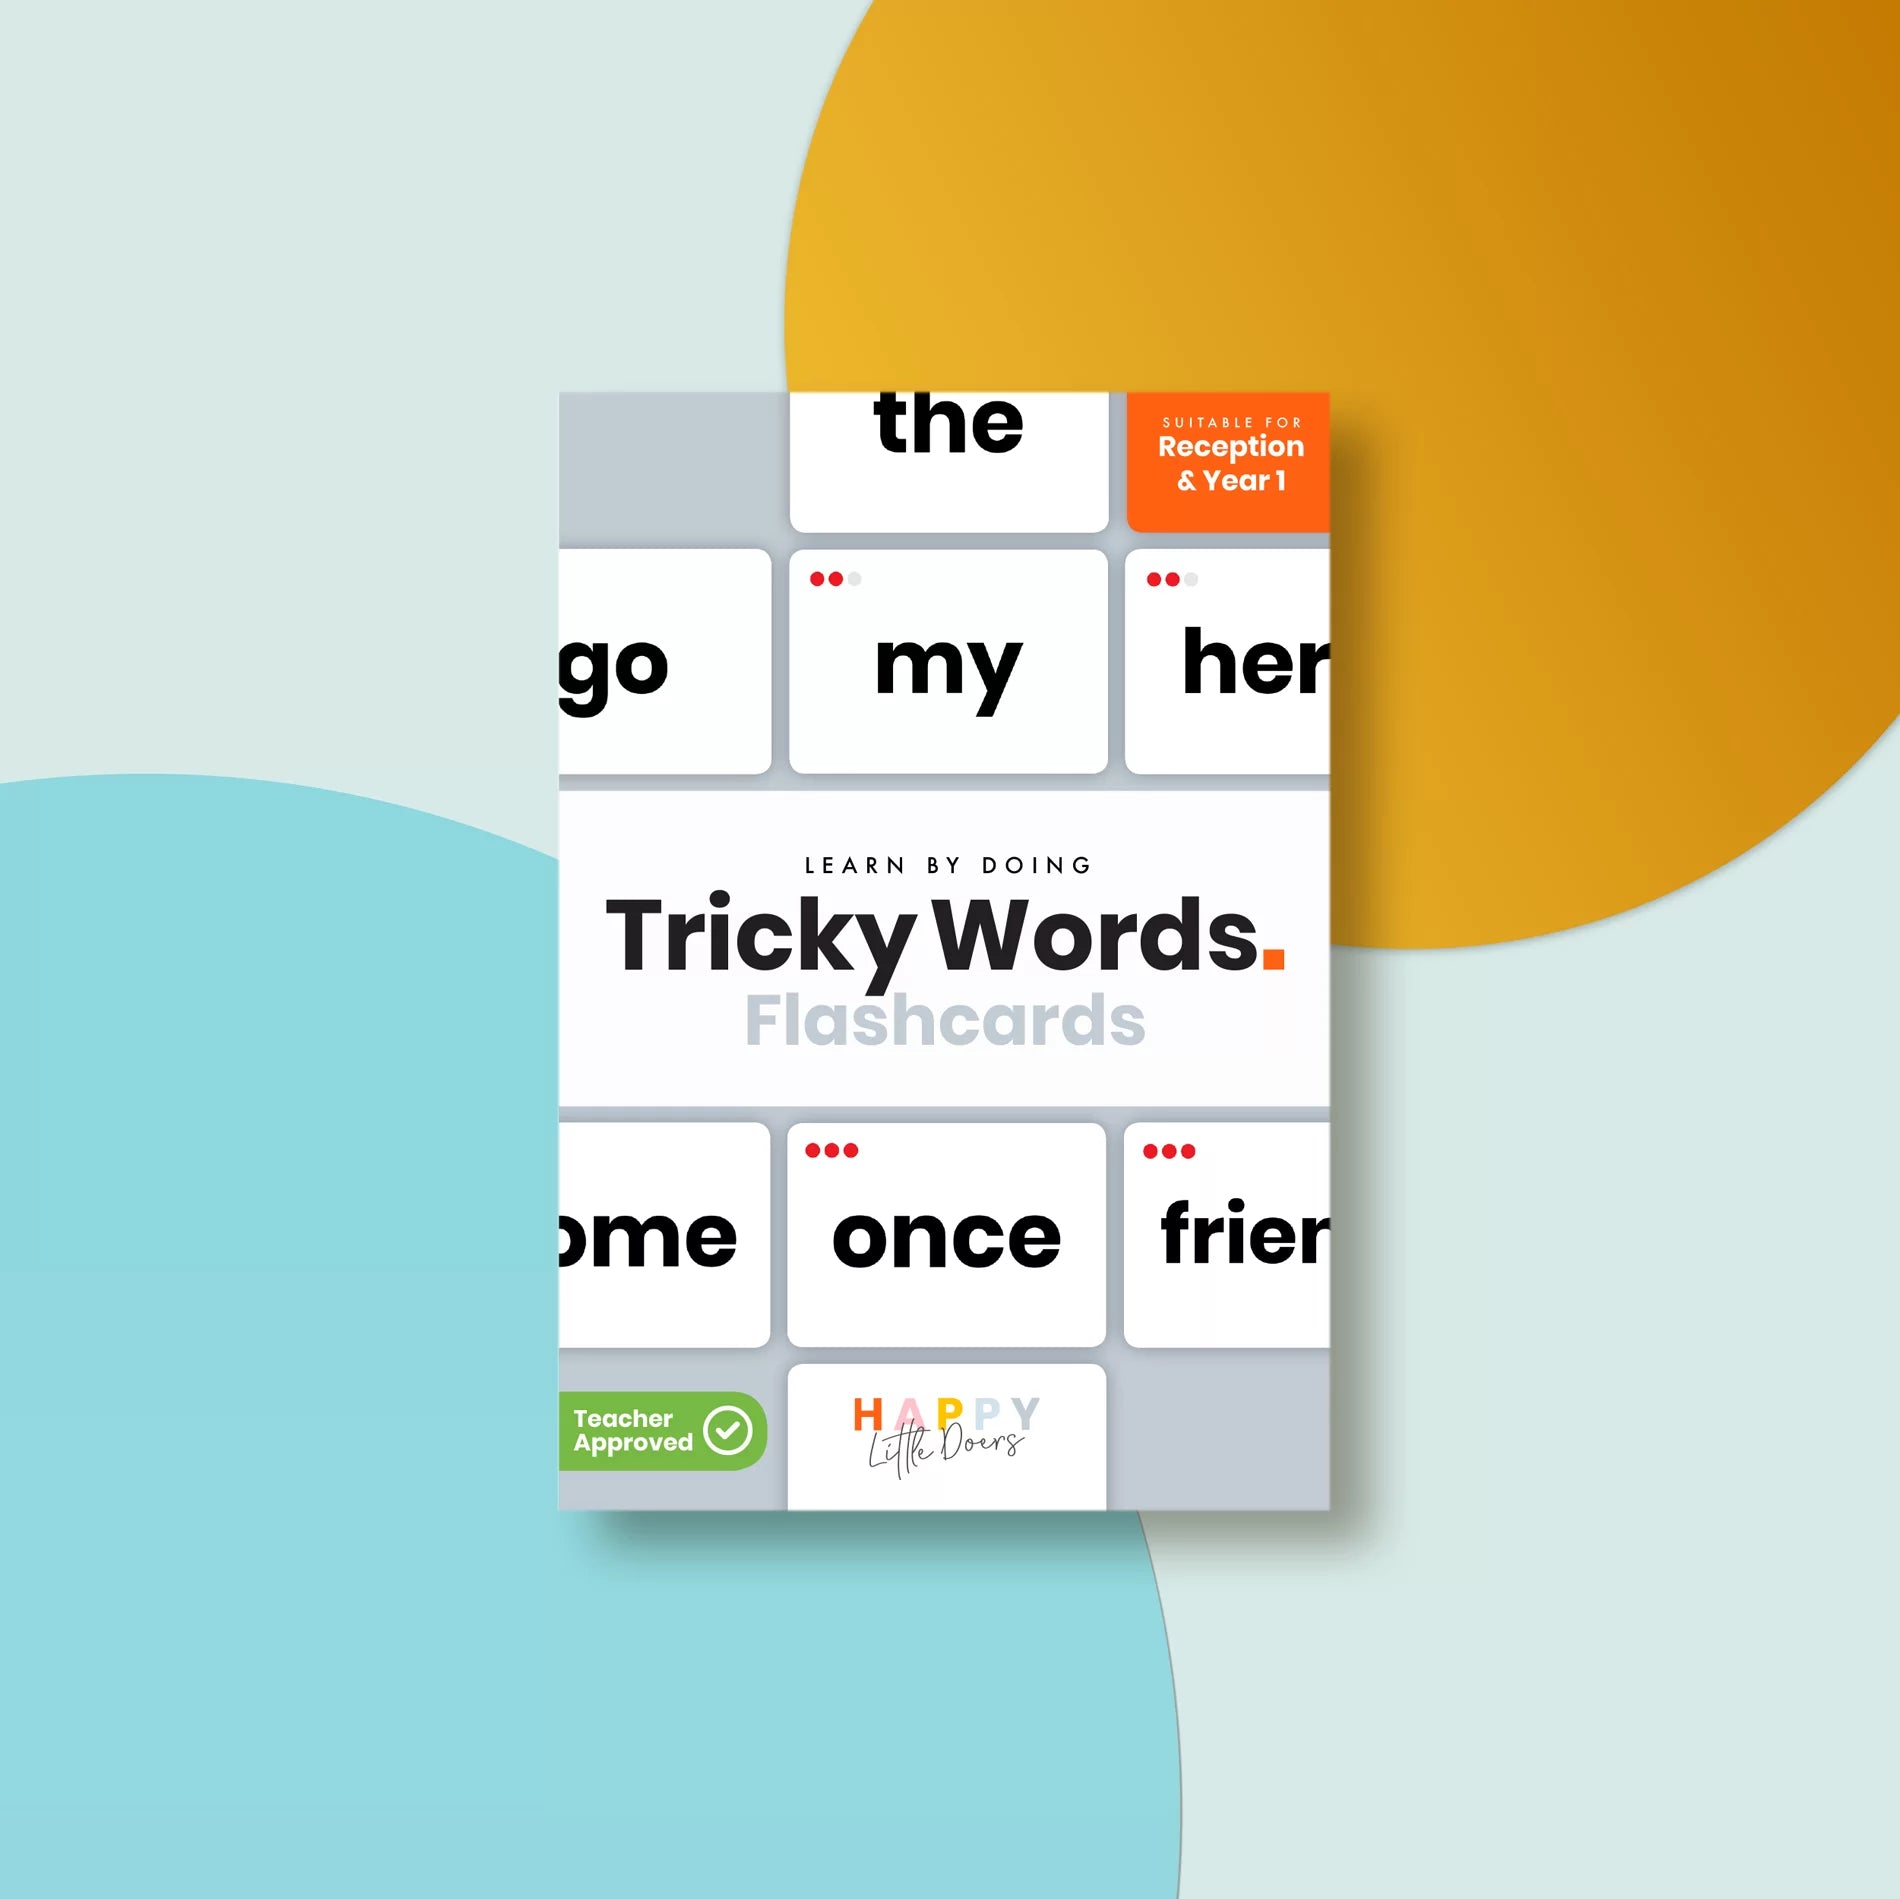 An image of Tricky Words Flashcards - Reception & Year 1 - Happy Little Doers